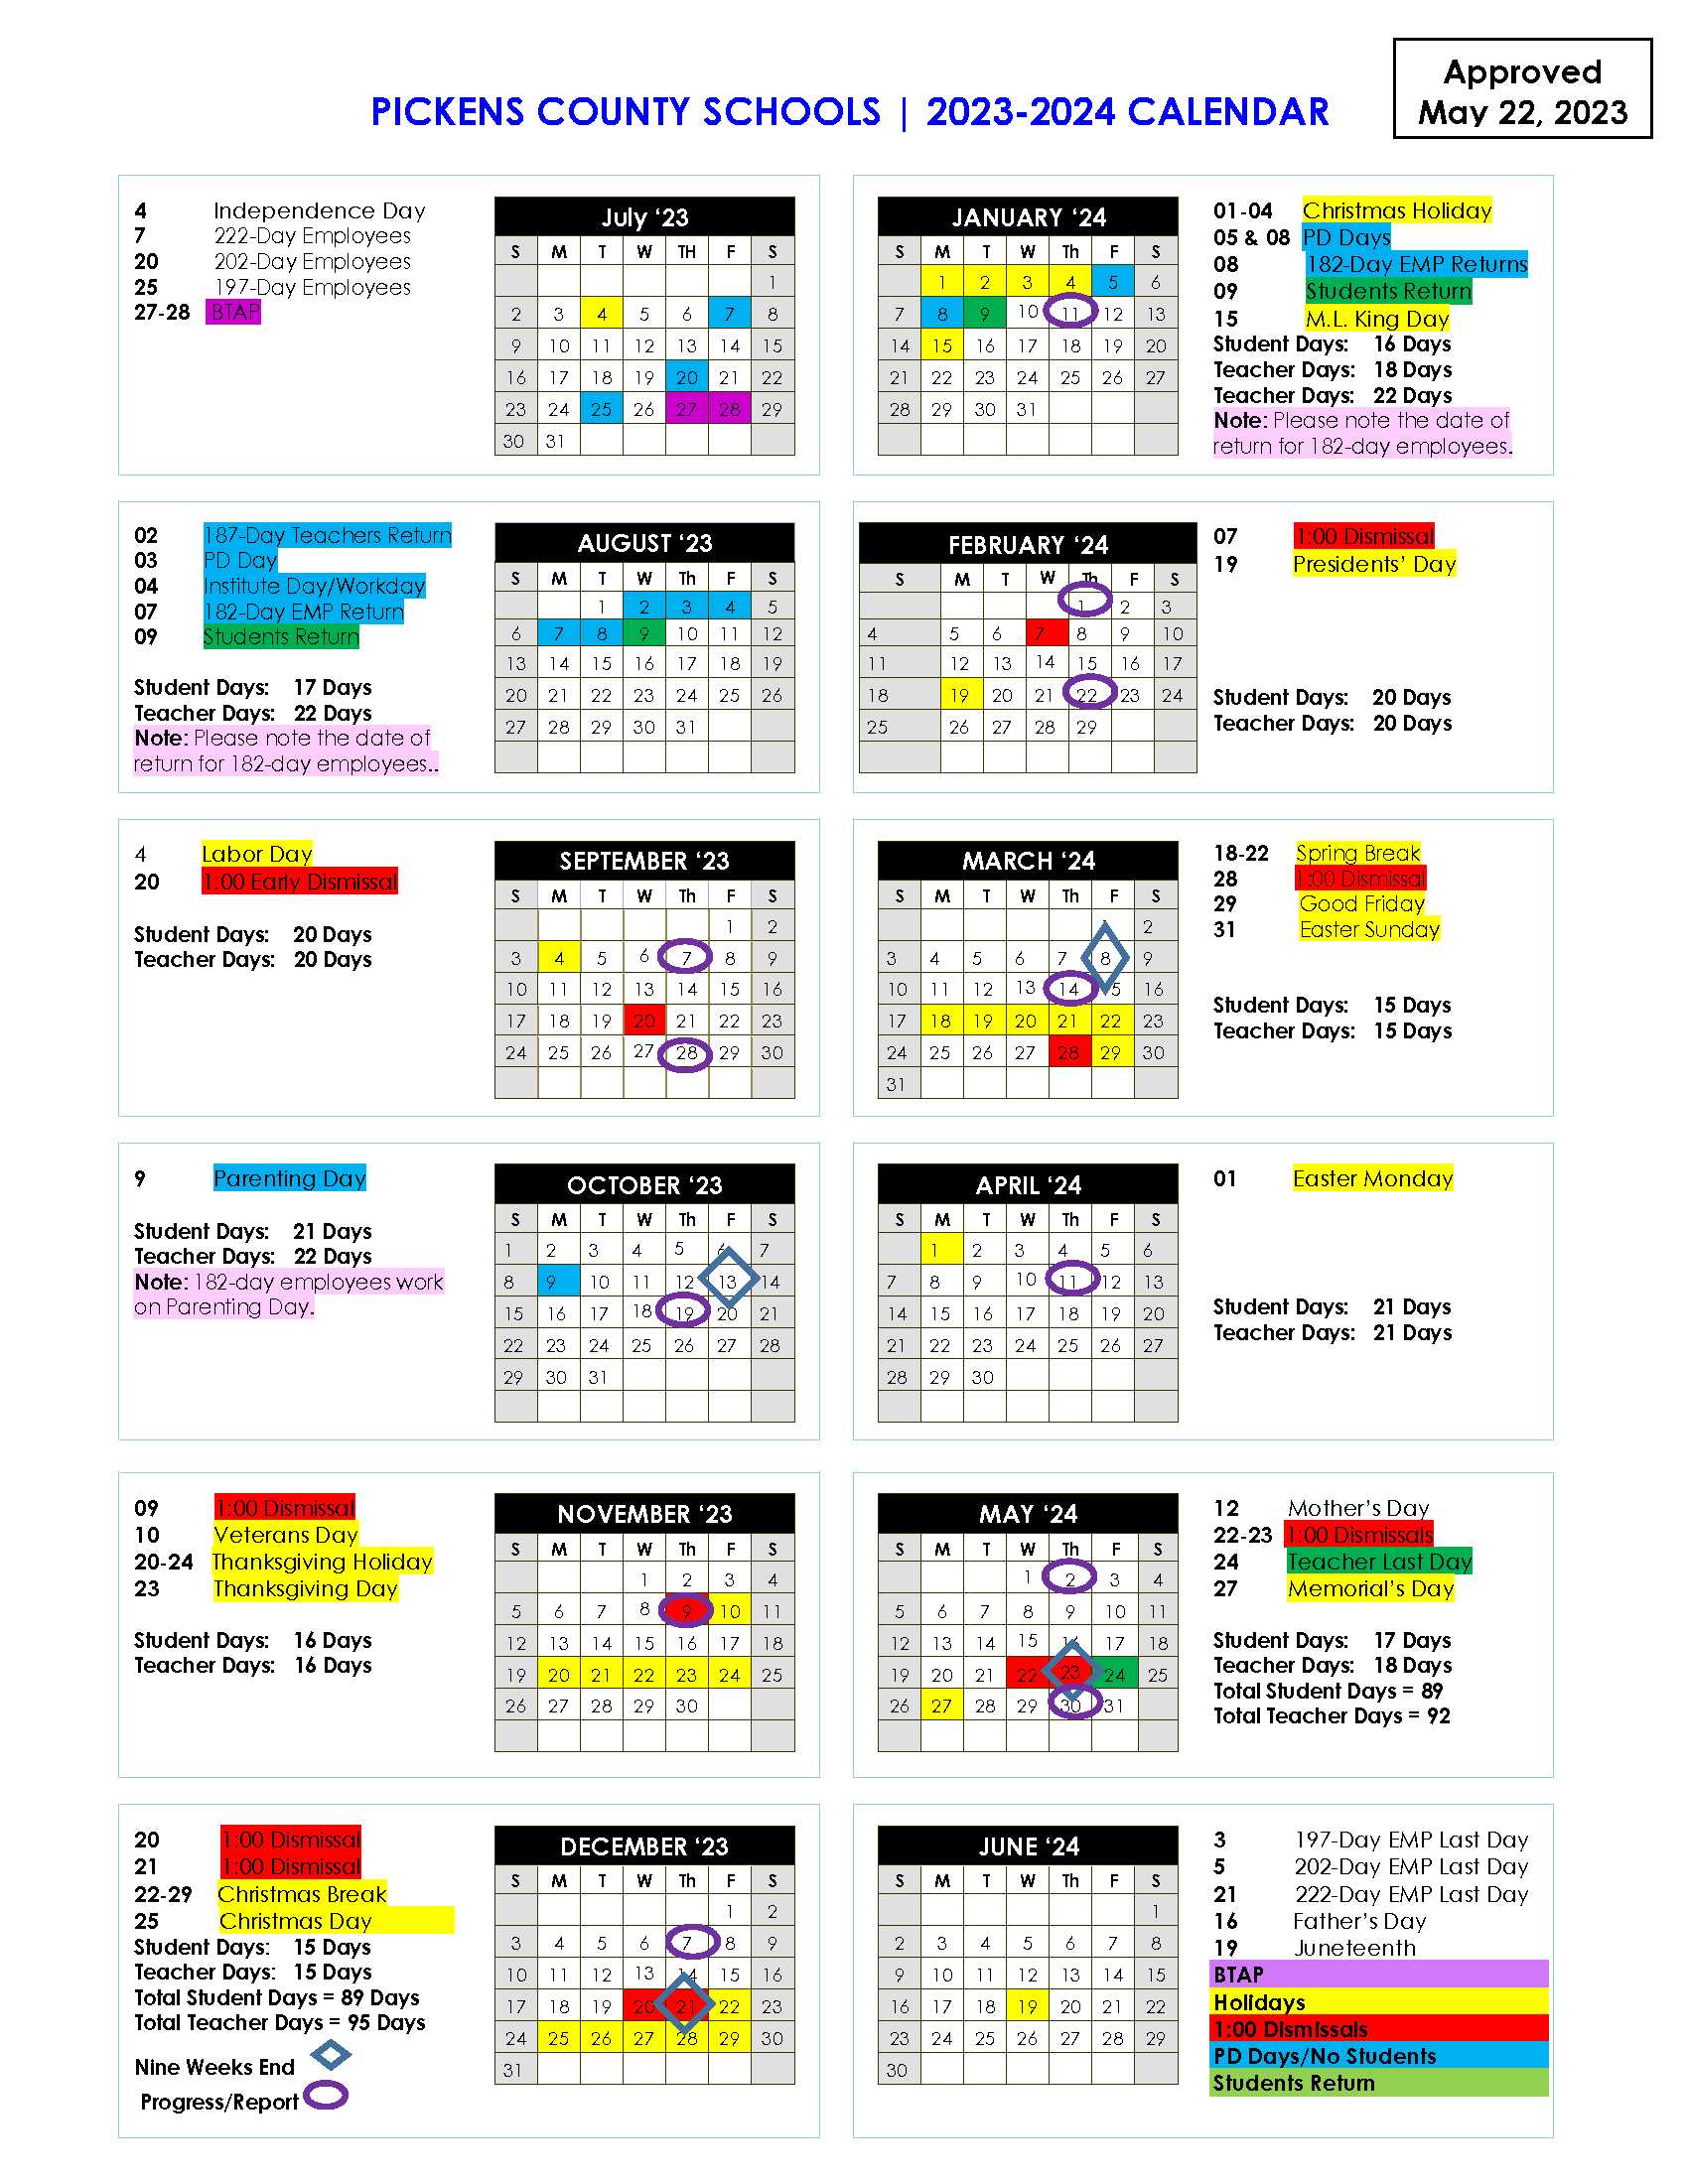 Pickens County Schools Calendar 2023-2024 APPROVED 5.22.2023 Version 1